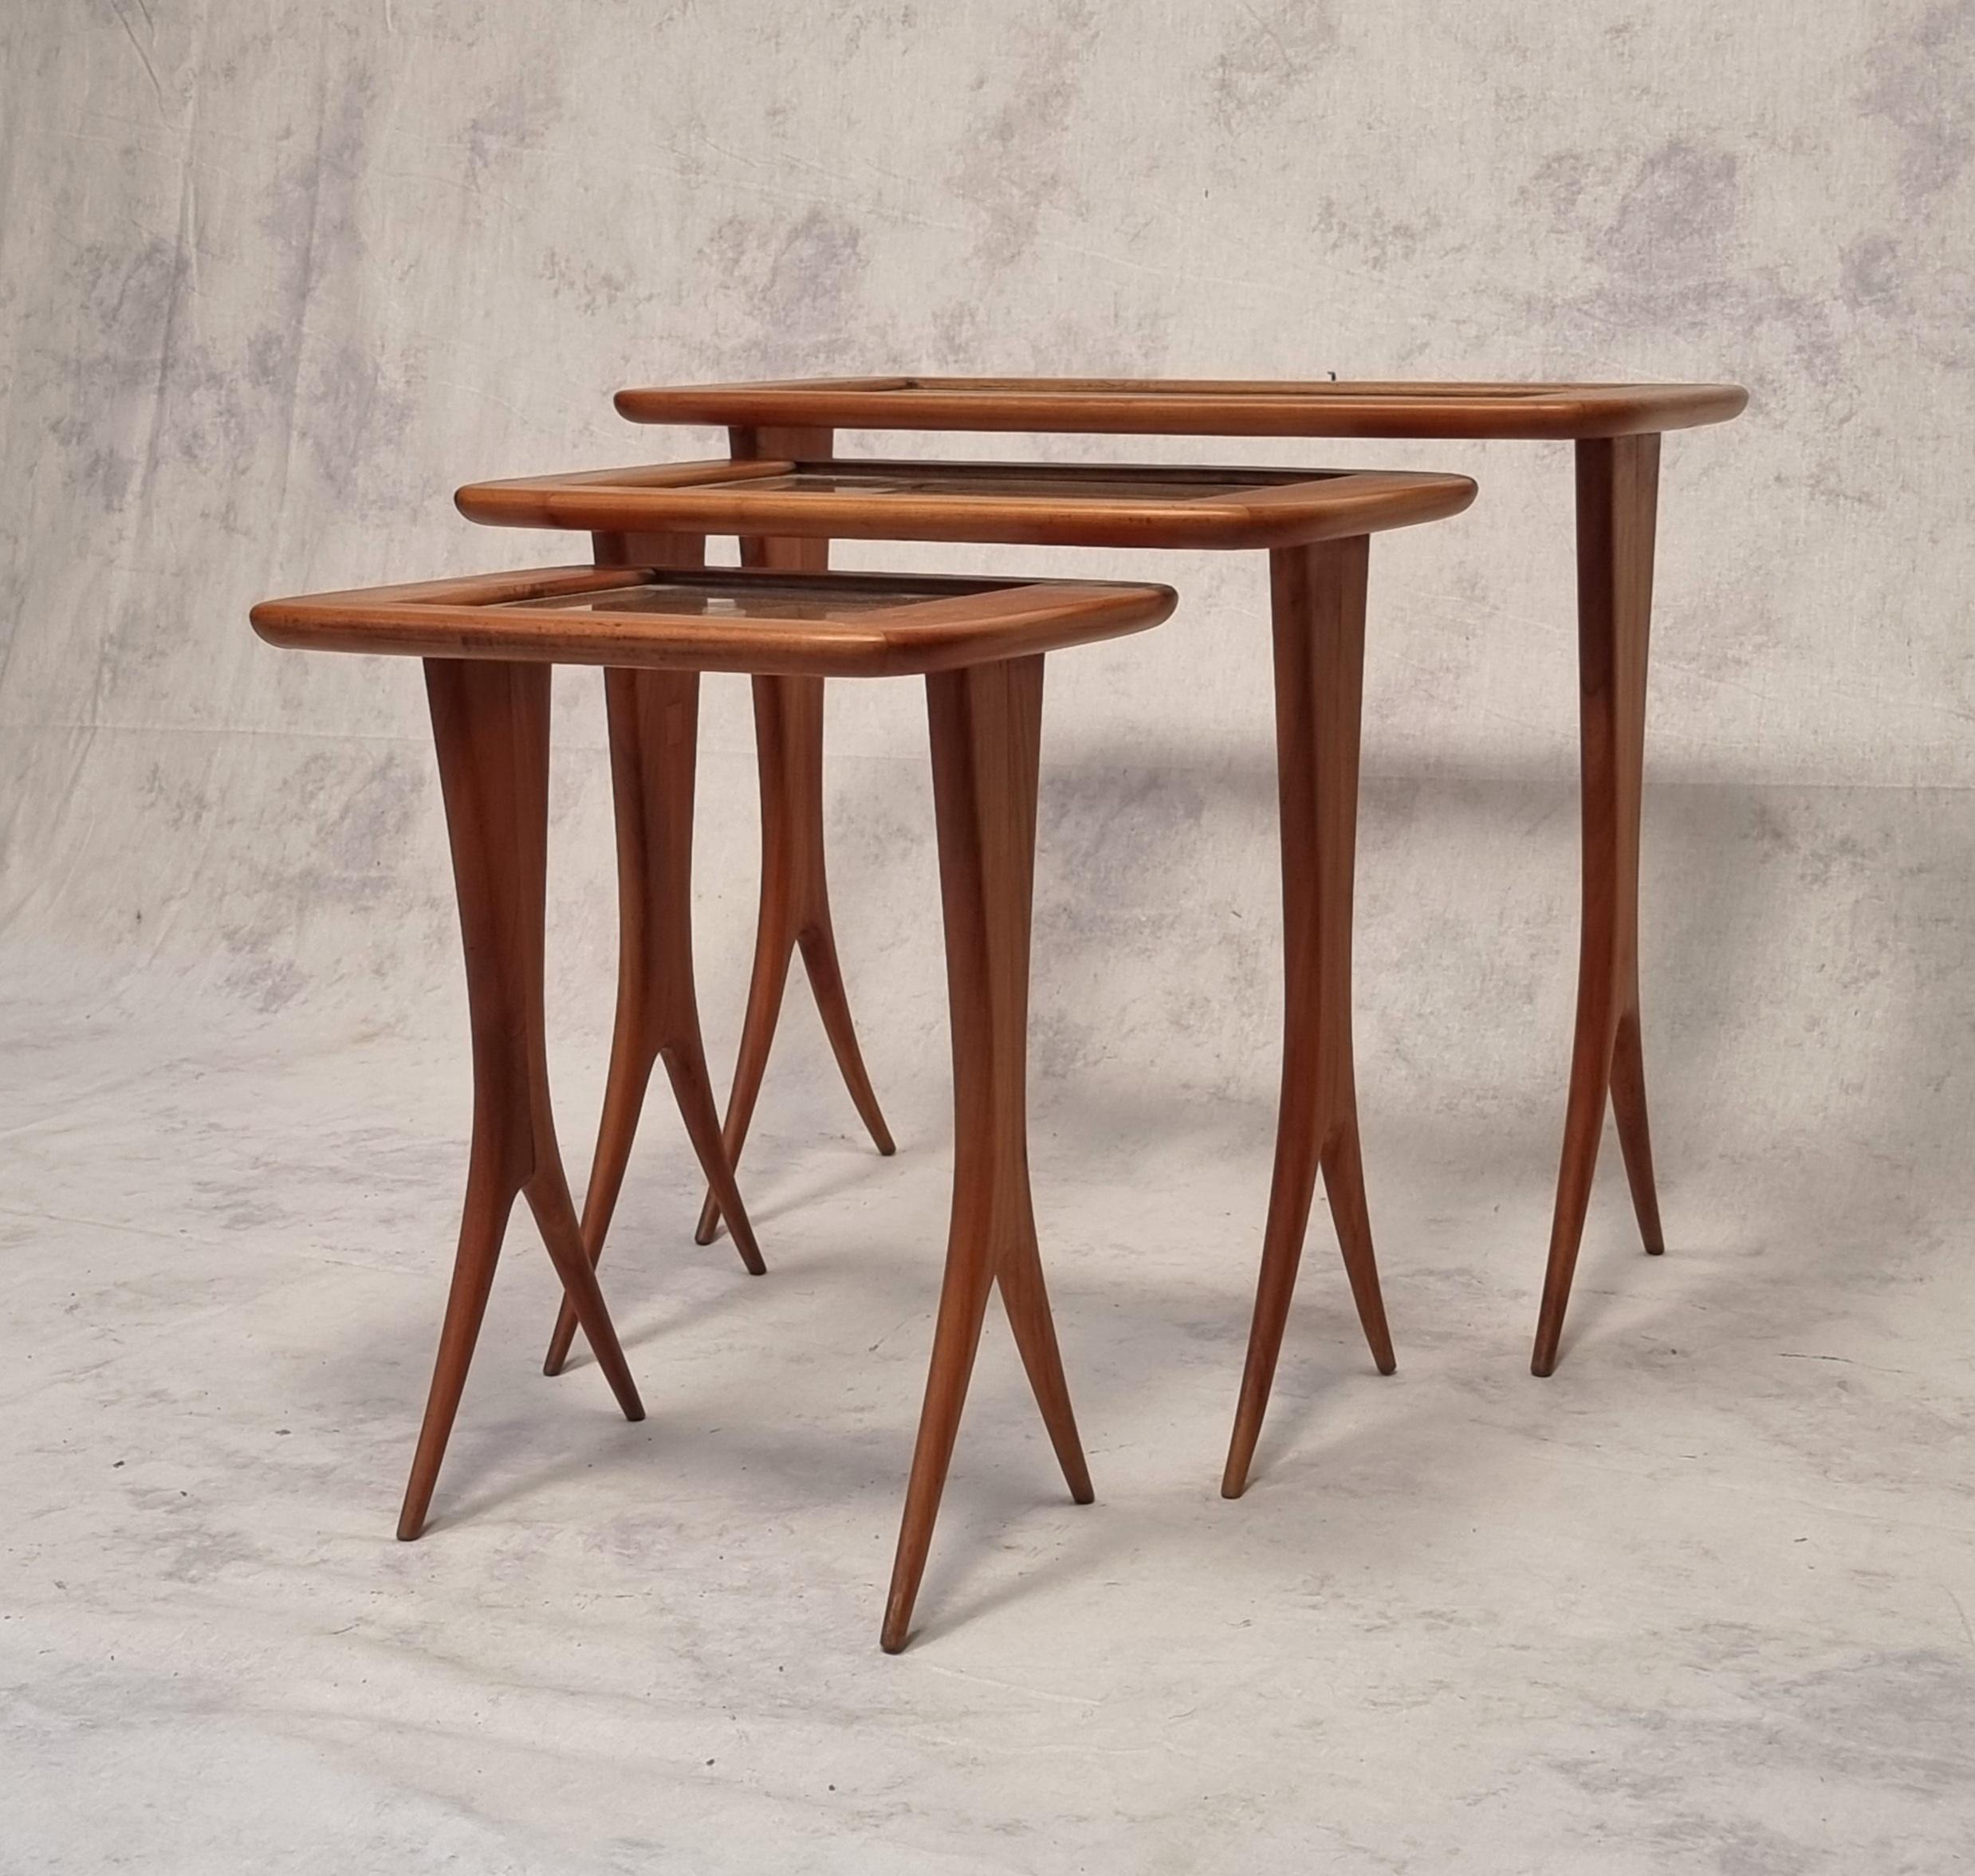 Superb and rare set of three nesting tables by the French designer Raphaël Raffel dit Raffel. These three tables have a rectangular glass top and rest on an atypical base whose streamlined shape splits into two. This set is a beautiful